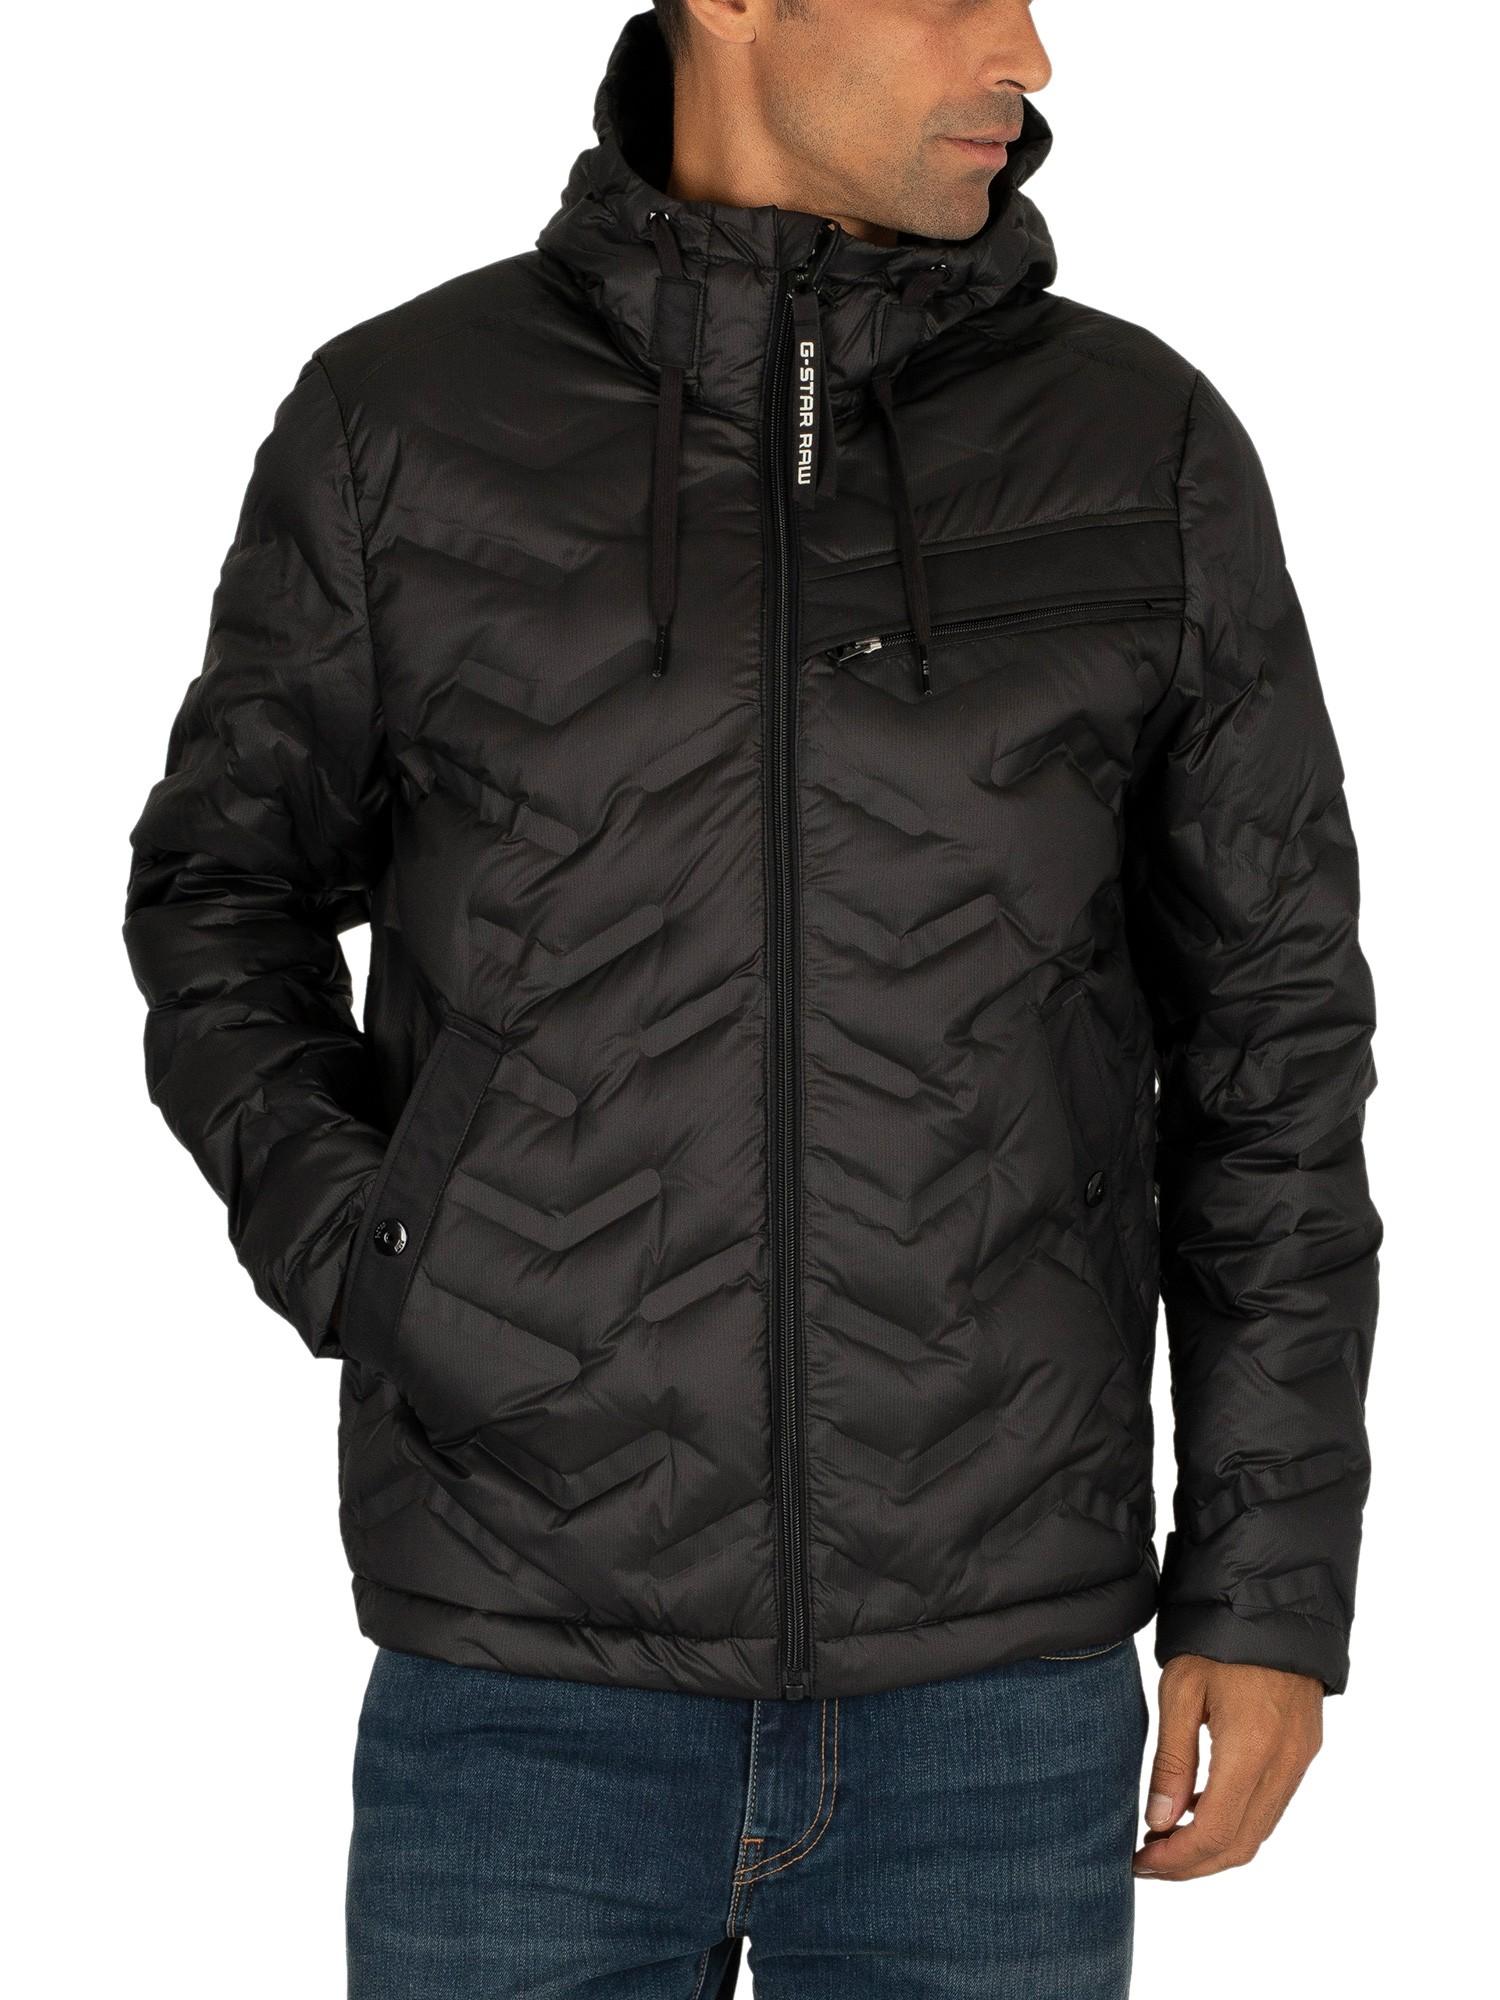 G-Star RAW Attacc Hooded Down Jacket in Black for Men - Lyst